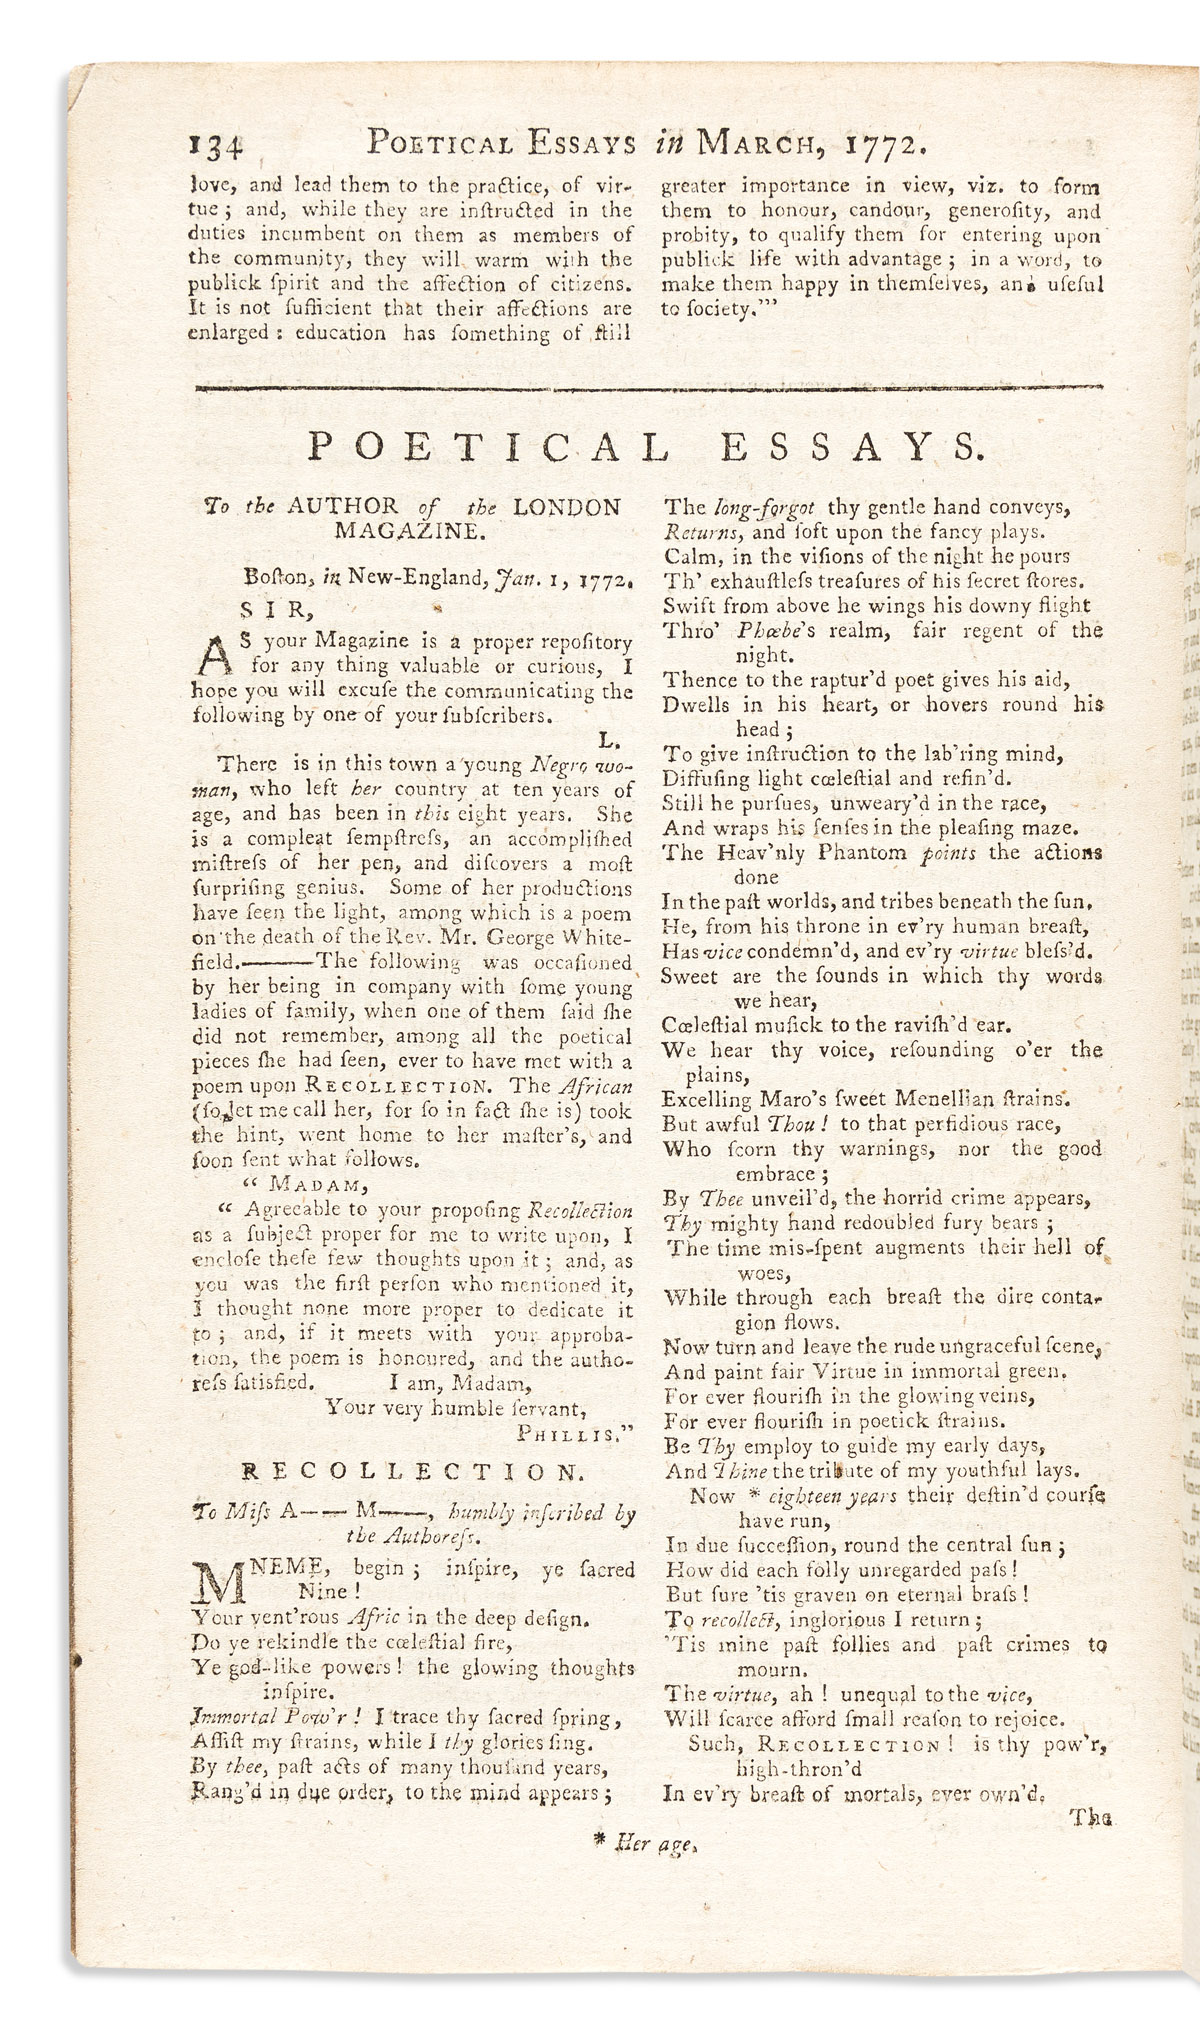 Wheatley, Phillis (c. 1753-1784) Recollection, to Miss A__ M__, Humbly Inscribed by the Authoress, as printed in The London Magazine.